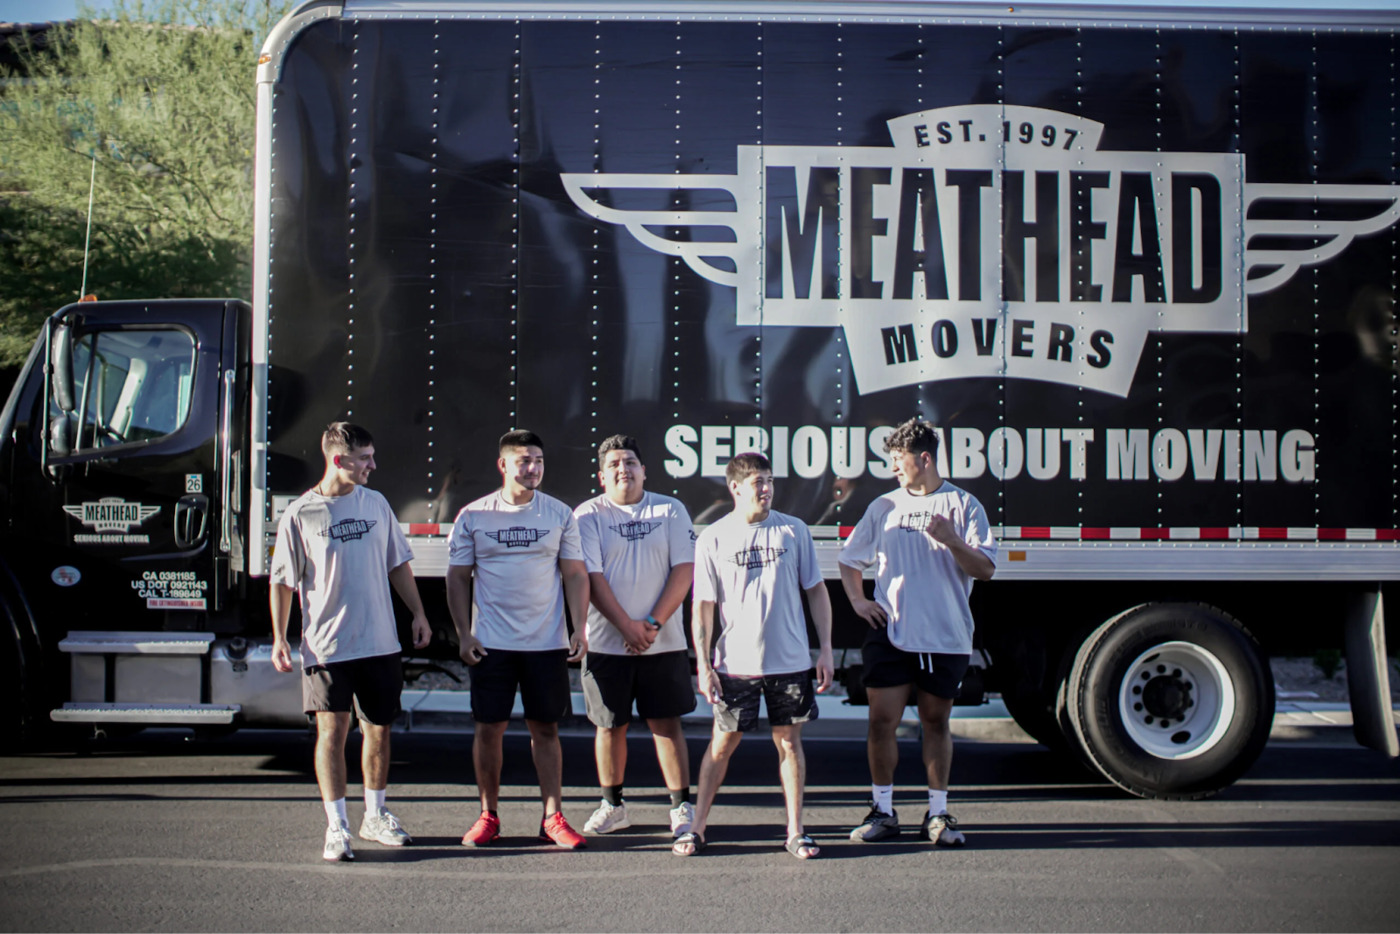 Meathead Movers, founded in 1997, is California’s premier moving company, offering local and long-distance moving services and packing and storage solutions.